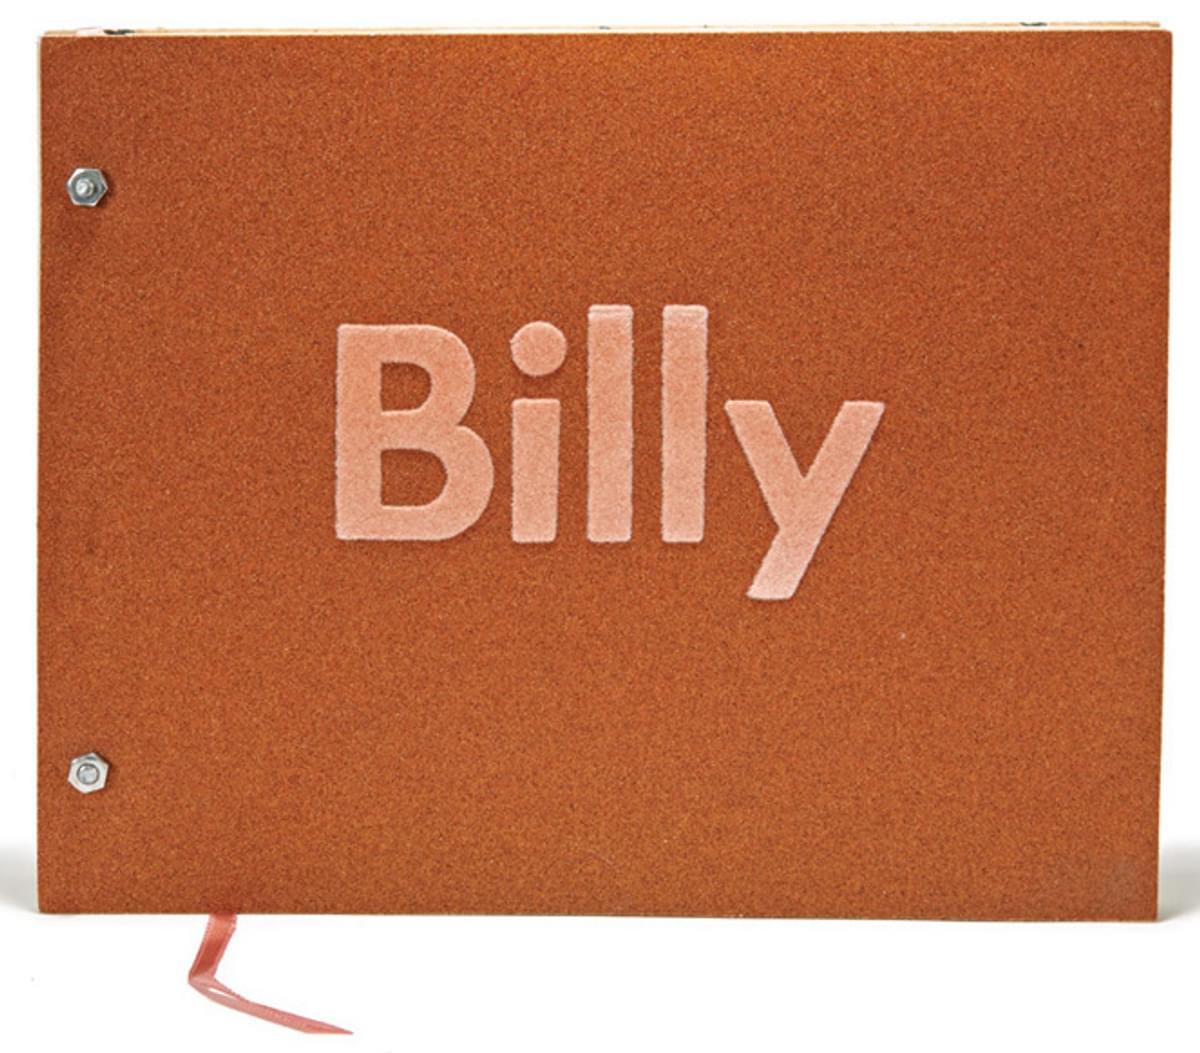 Ed Ruscha Billy catalogue for exhibition of work by Billy Al Bengston